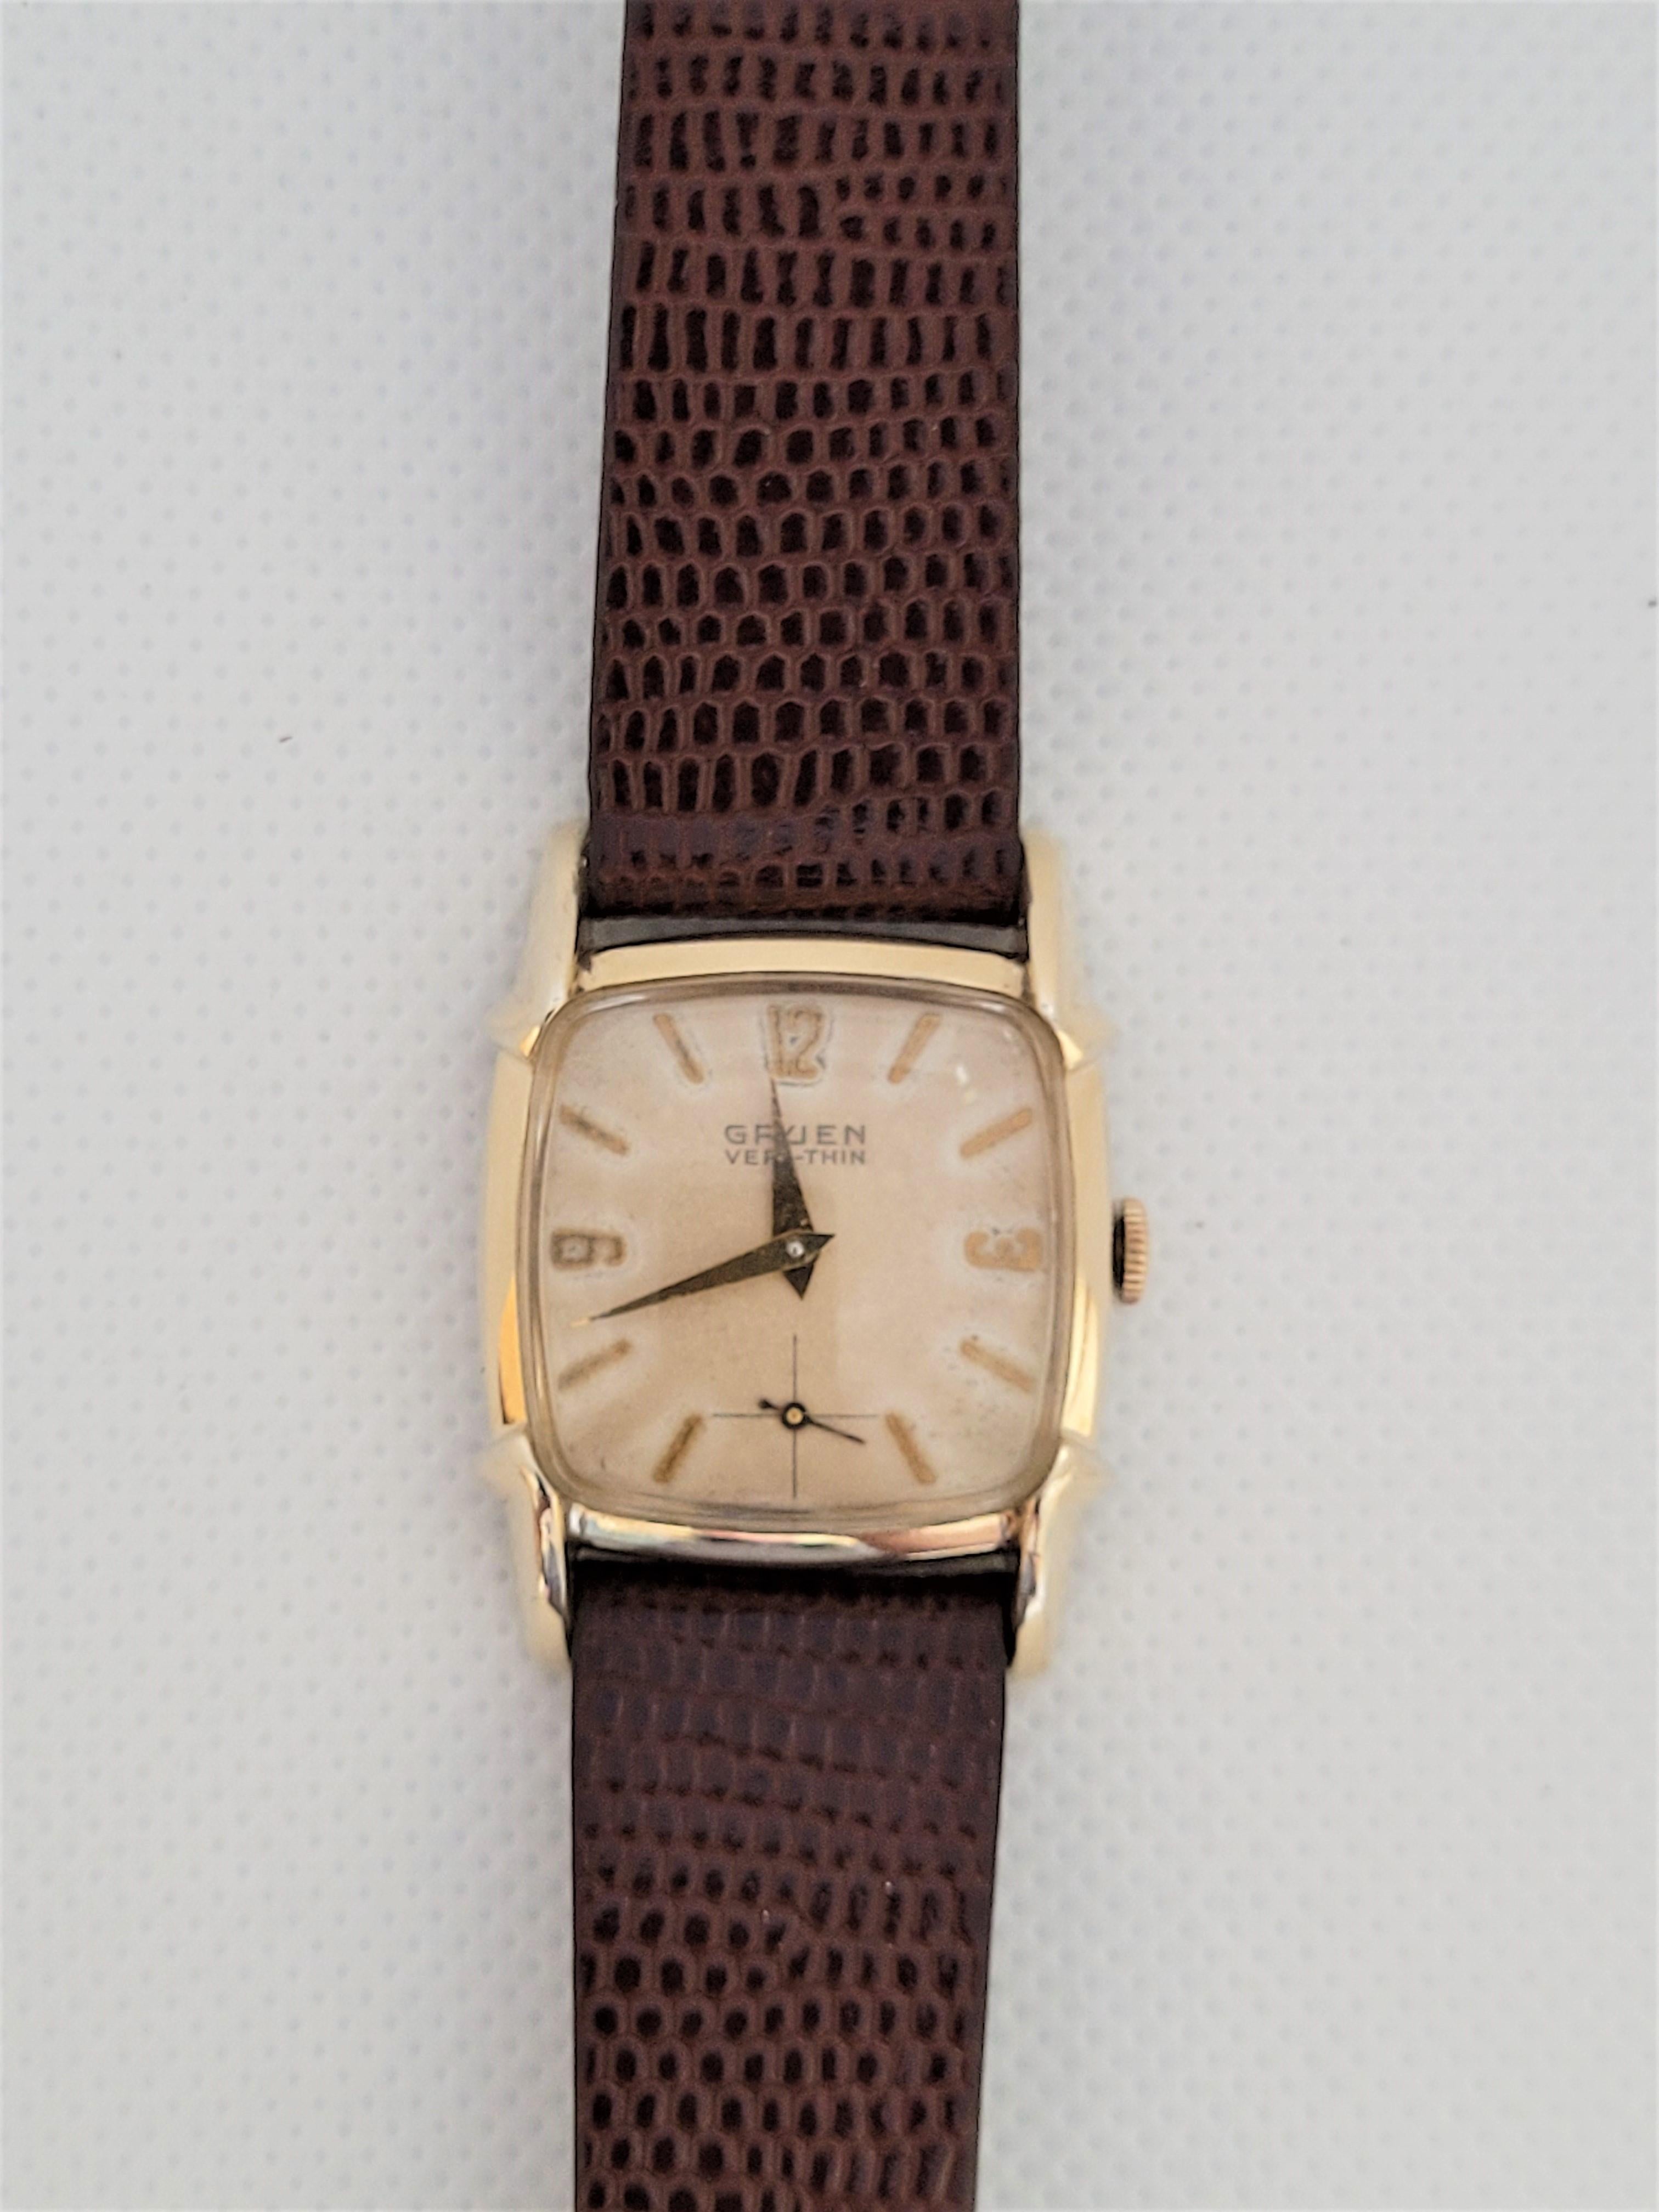 Vintage Gruen Veri-Thin watch with a 26mm x 26mm (10mm thick) square case that's 10kt rolled gold plated, champagne face with accent gold numerals. The plexiglass crystal is very clean and the face has slight discoloration due to age but is in good